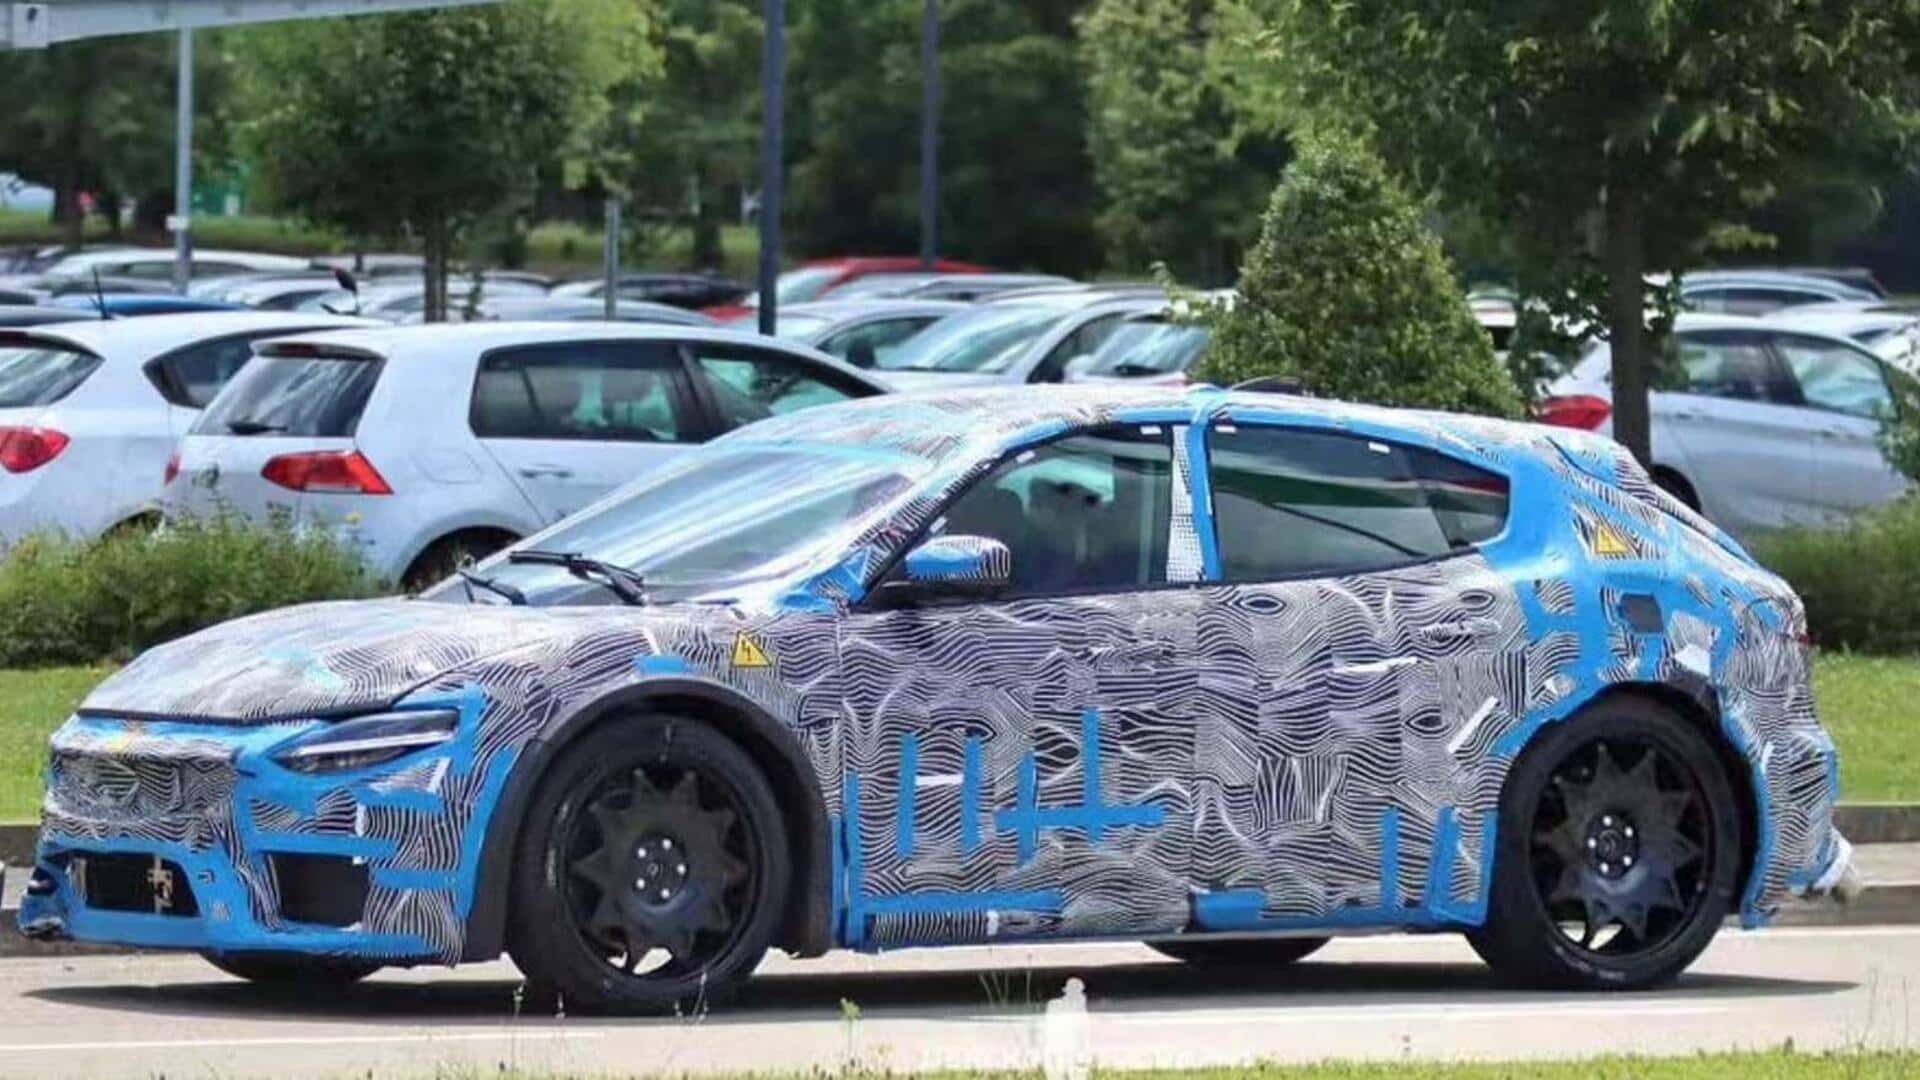 Ferrari's first-ever EV spotted testing: Check design features